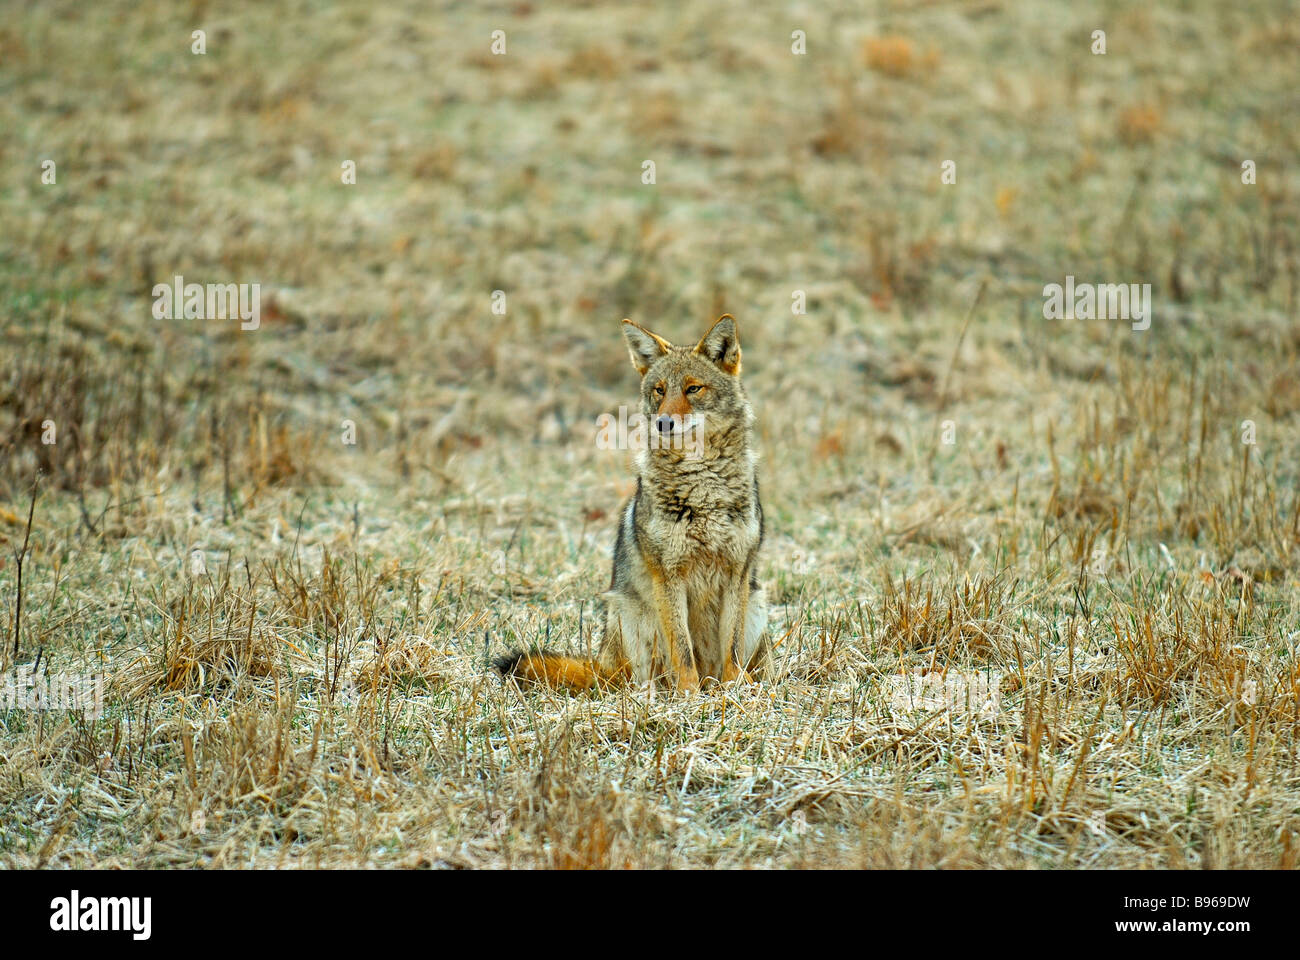 Coyote sitting upright in a field at Cades Cove, Great Smoky Mountains National Park Stock Photo